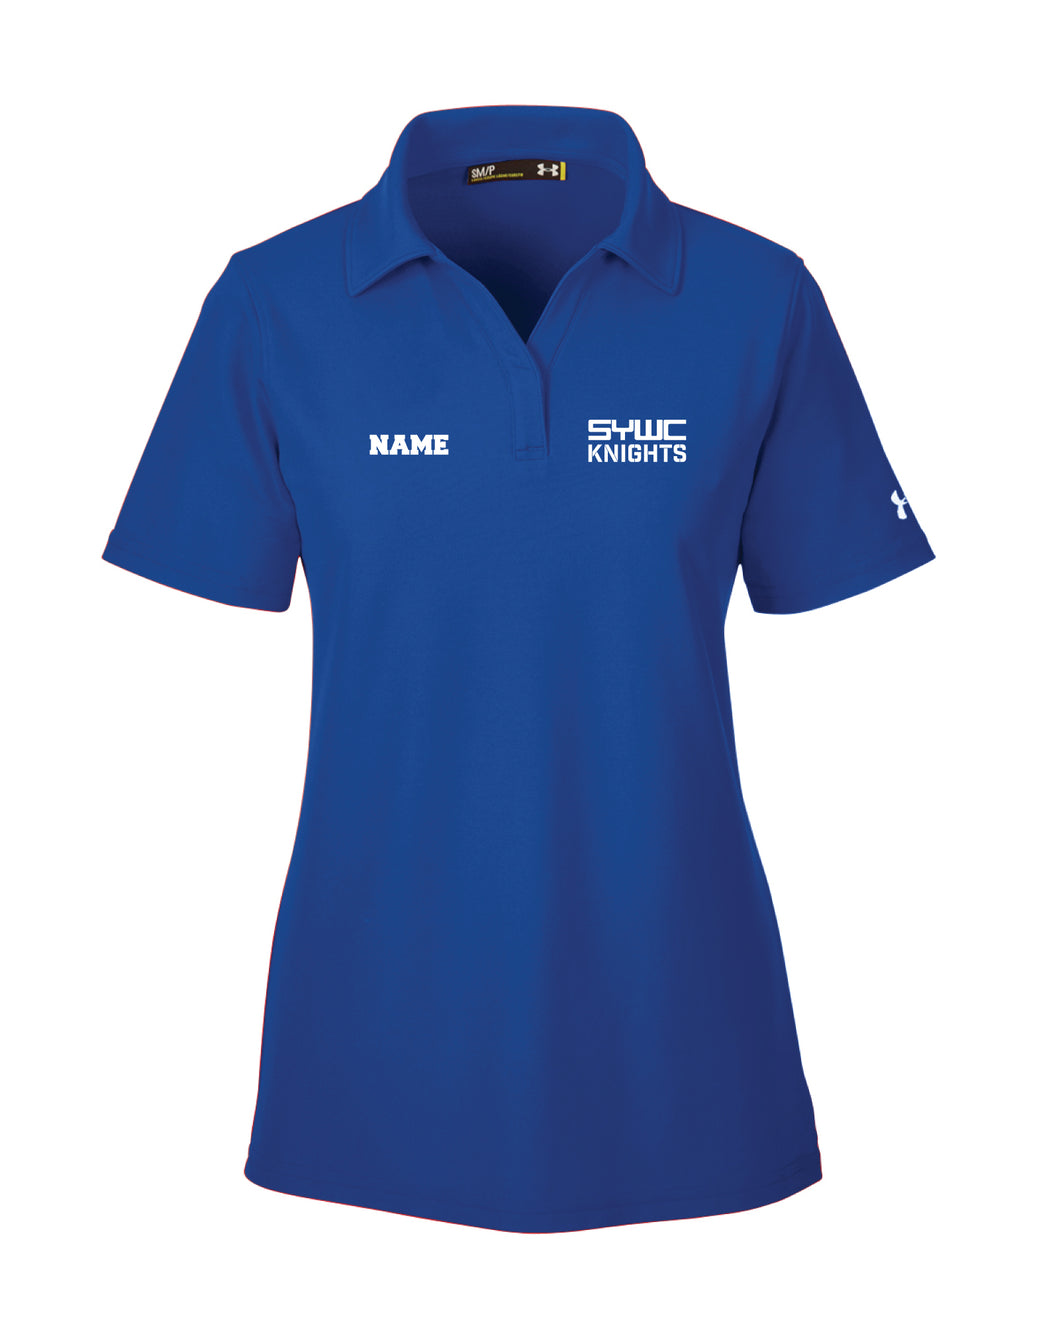 SYWC Under Armour Ladies' Corp Performance Polo - Royal - 5KounT2018